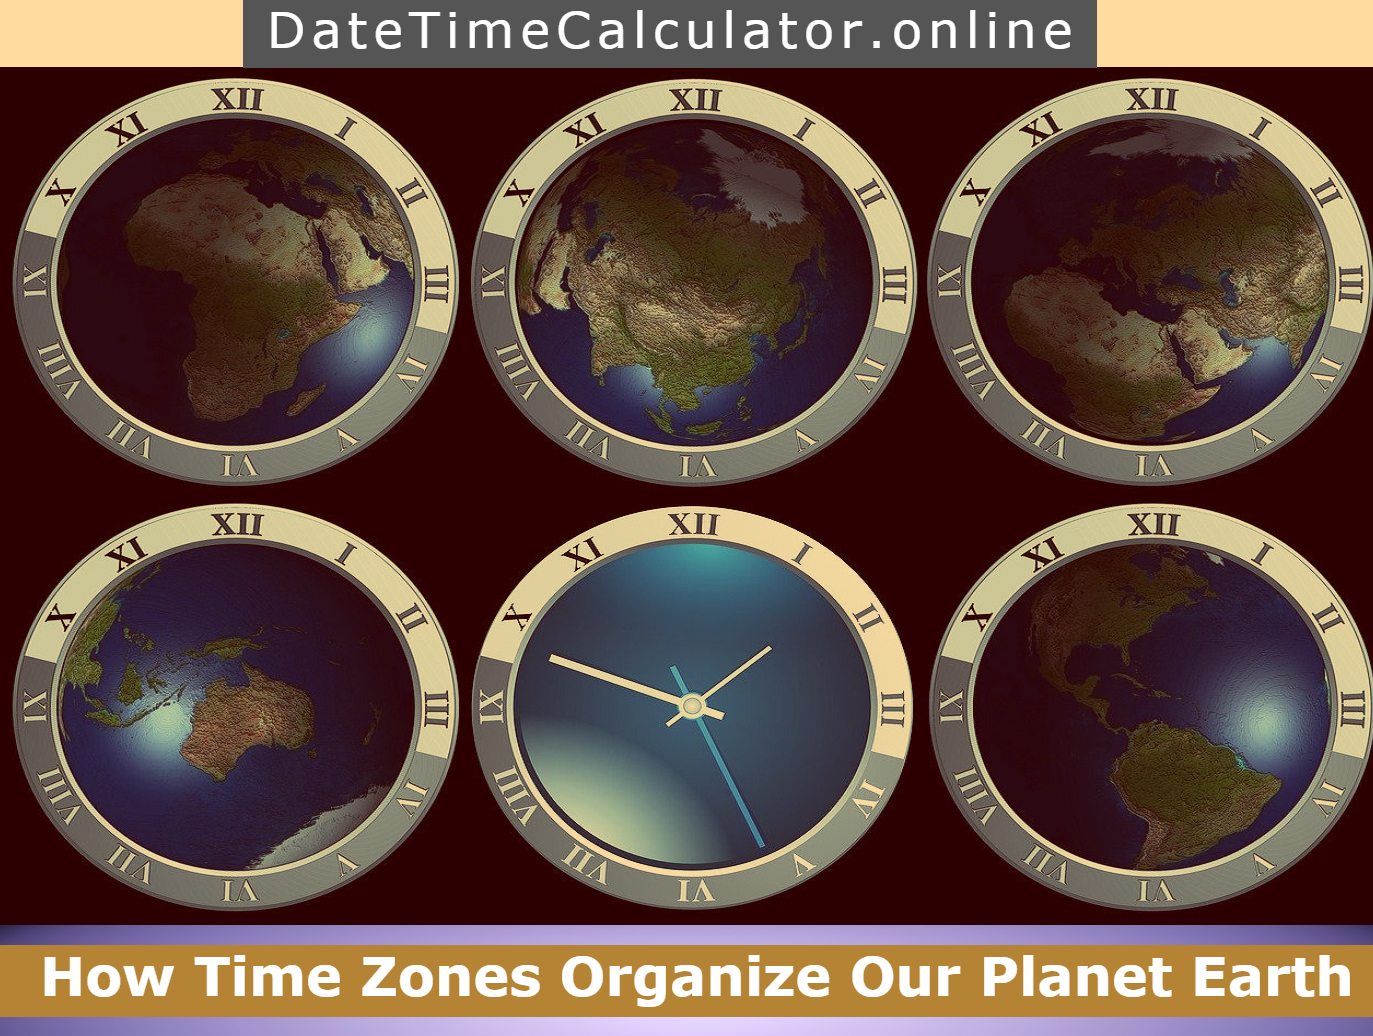 Concept of Time Zones